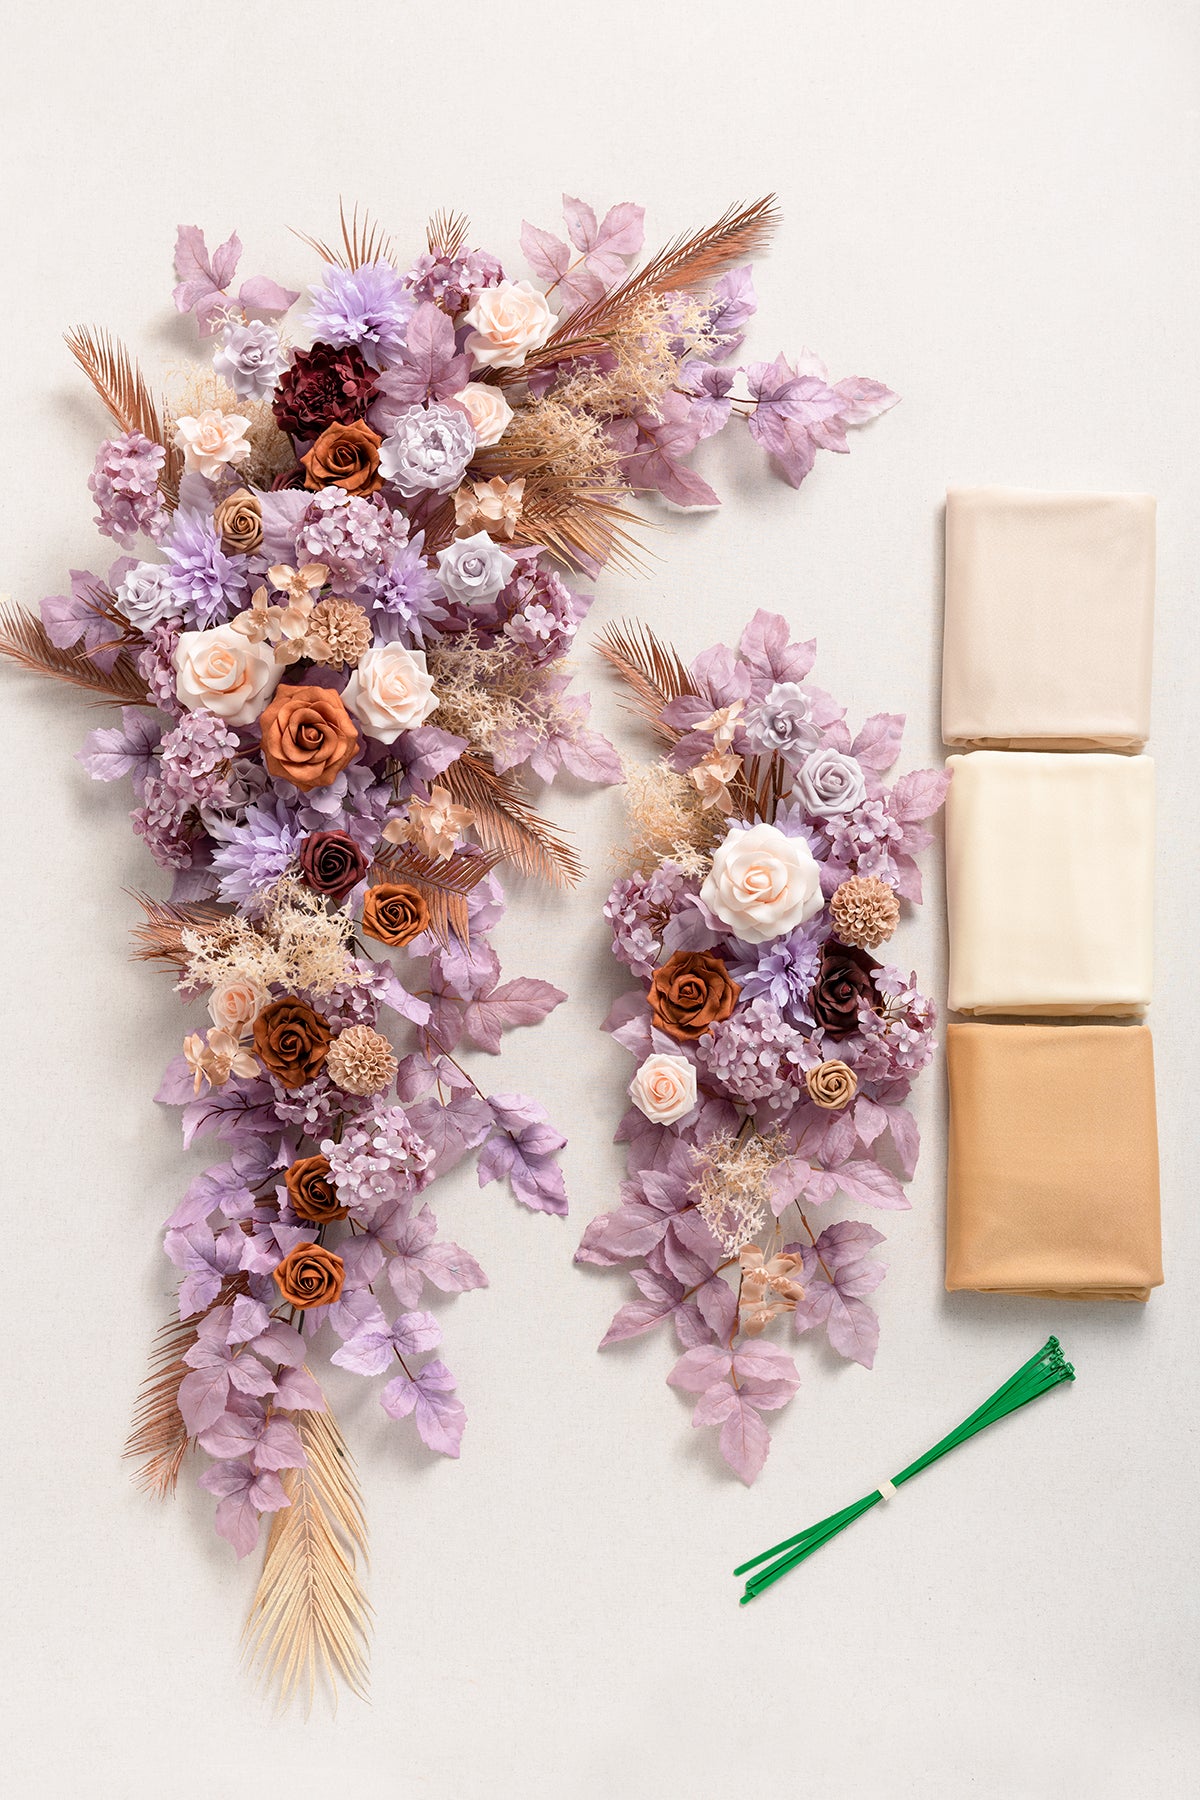 Flower Arch Decor with Drapes in Lavender Aster & Burnt Orange